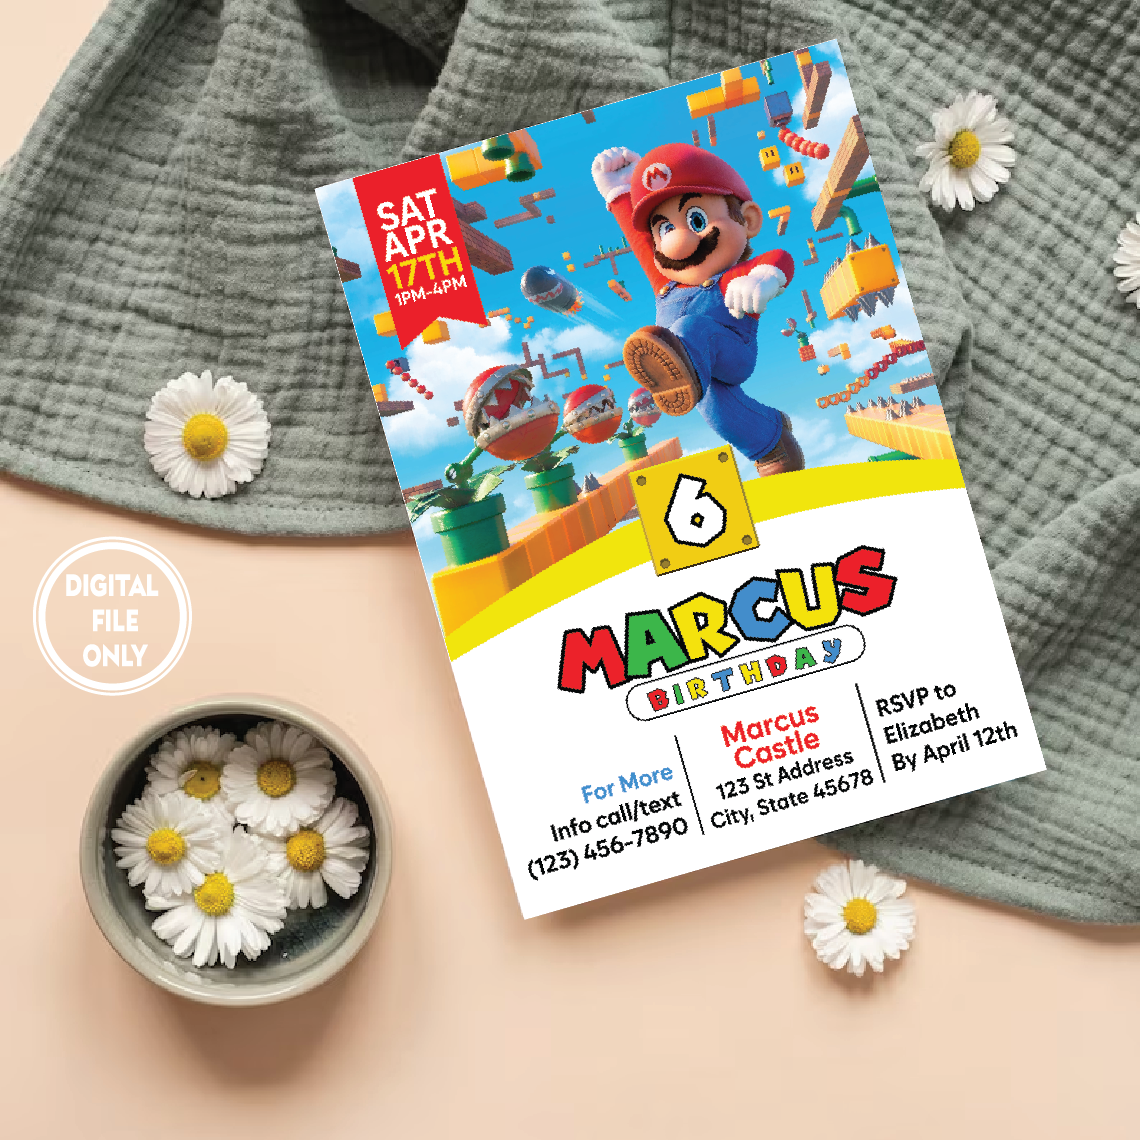 Personalized File Super Mario Birthday Invitation, Mario Bros Birthday Invitation Digital, Printable Birthday Invitation, Instant Download 5x7 PNG File Only